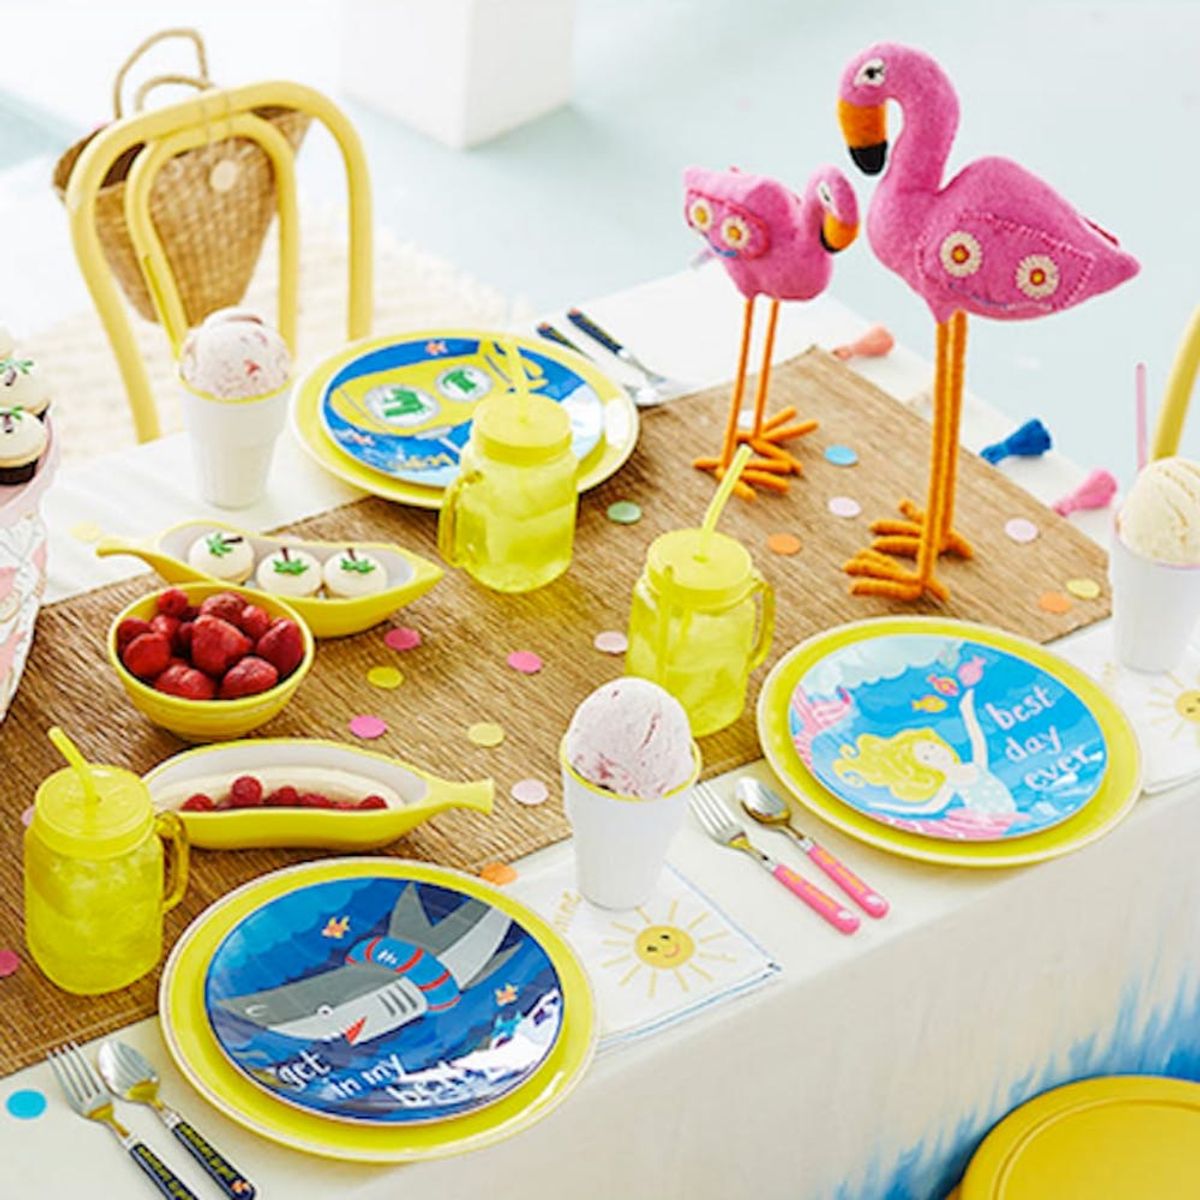 This New Pottery Barn Kids Collab Is Pool Party Perfection